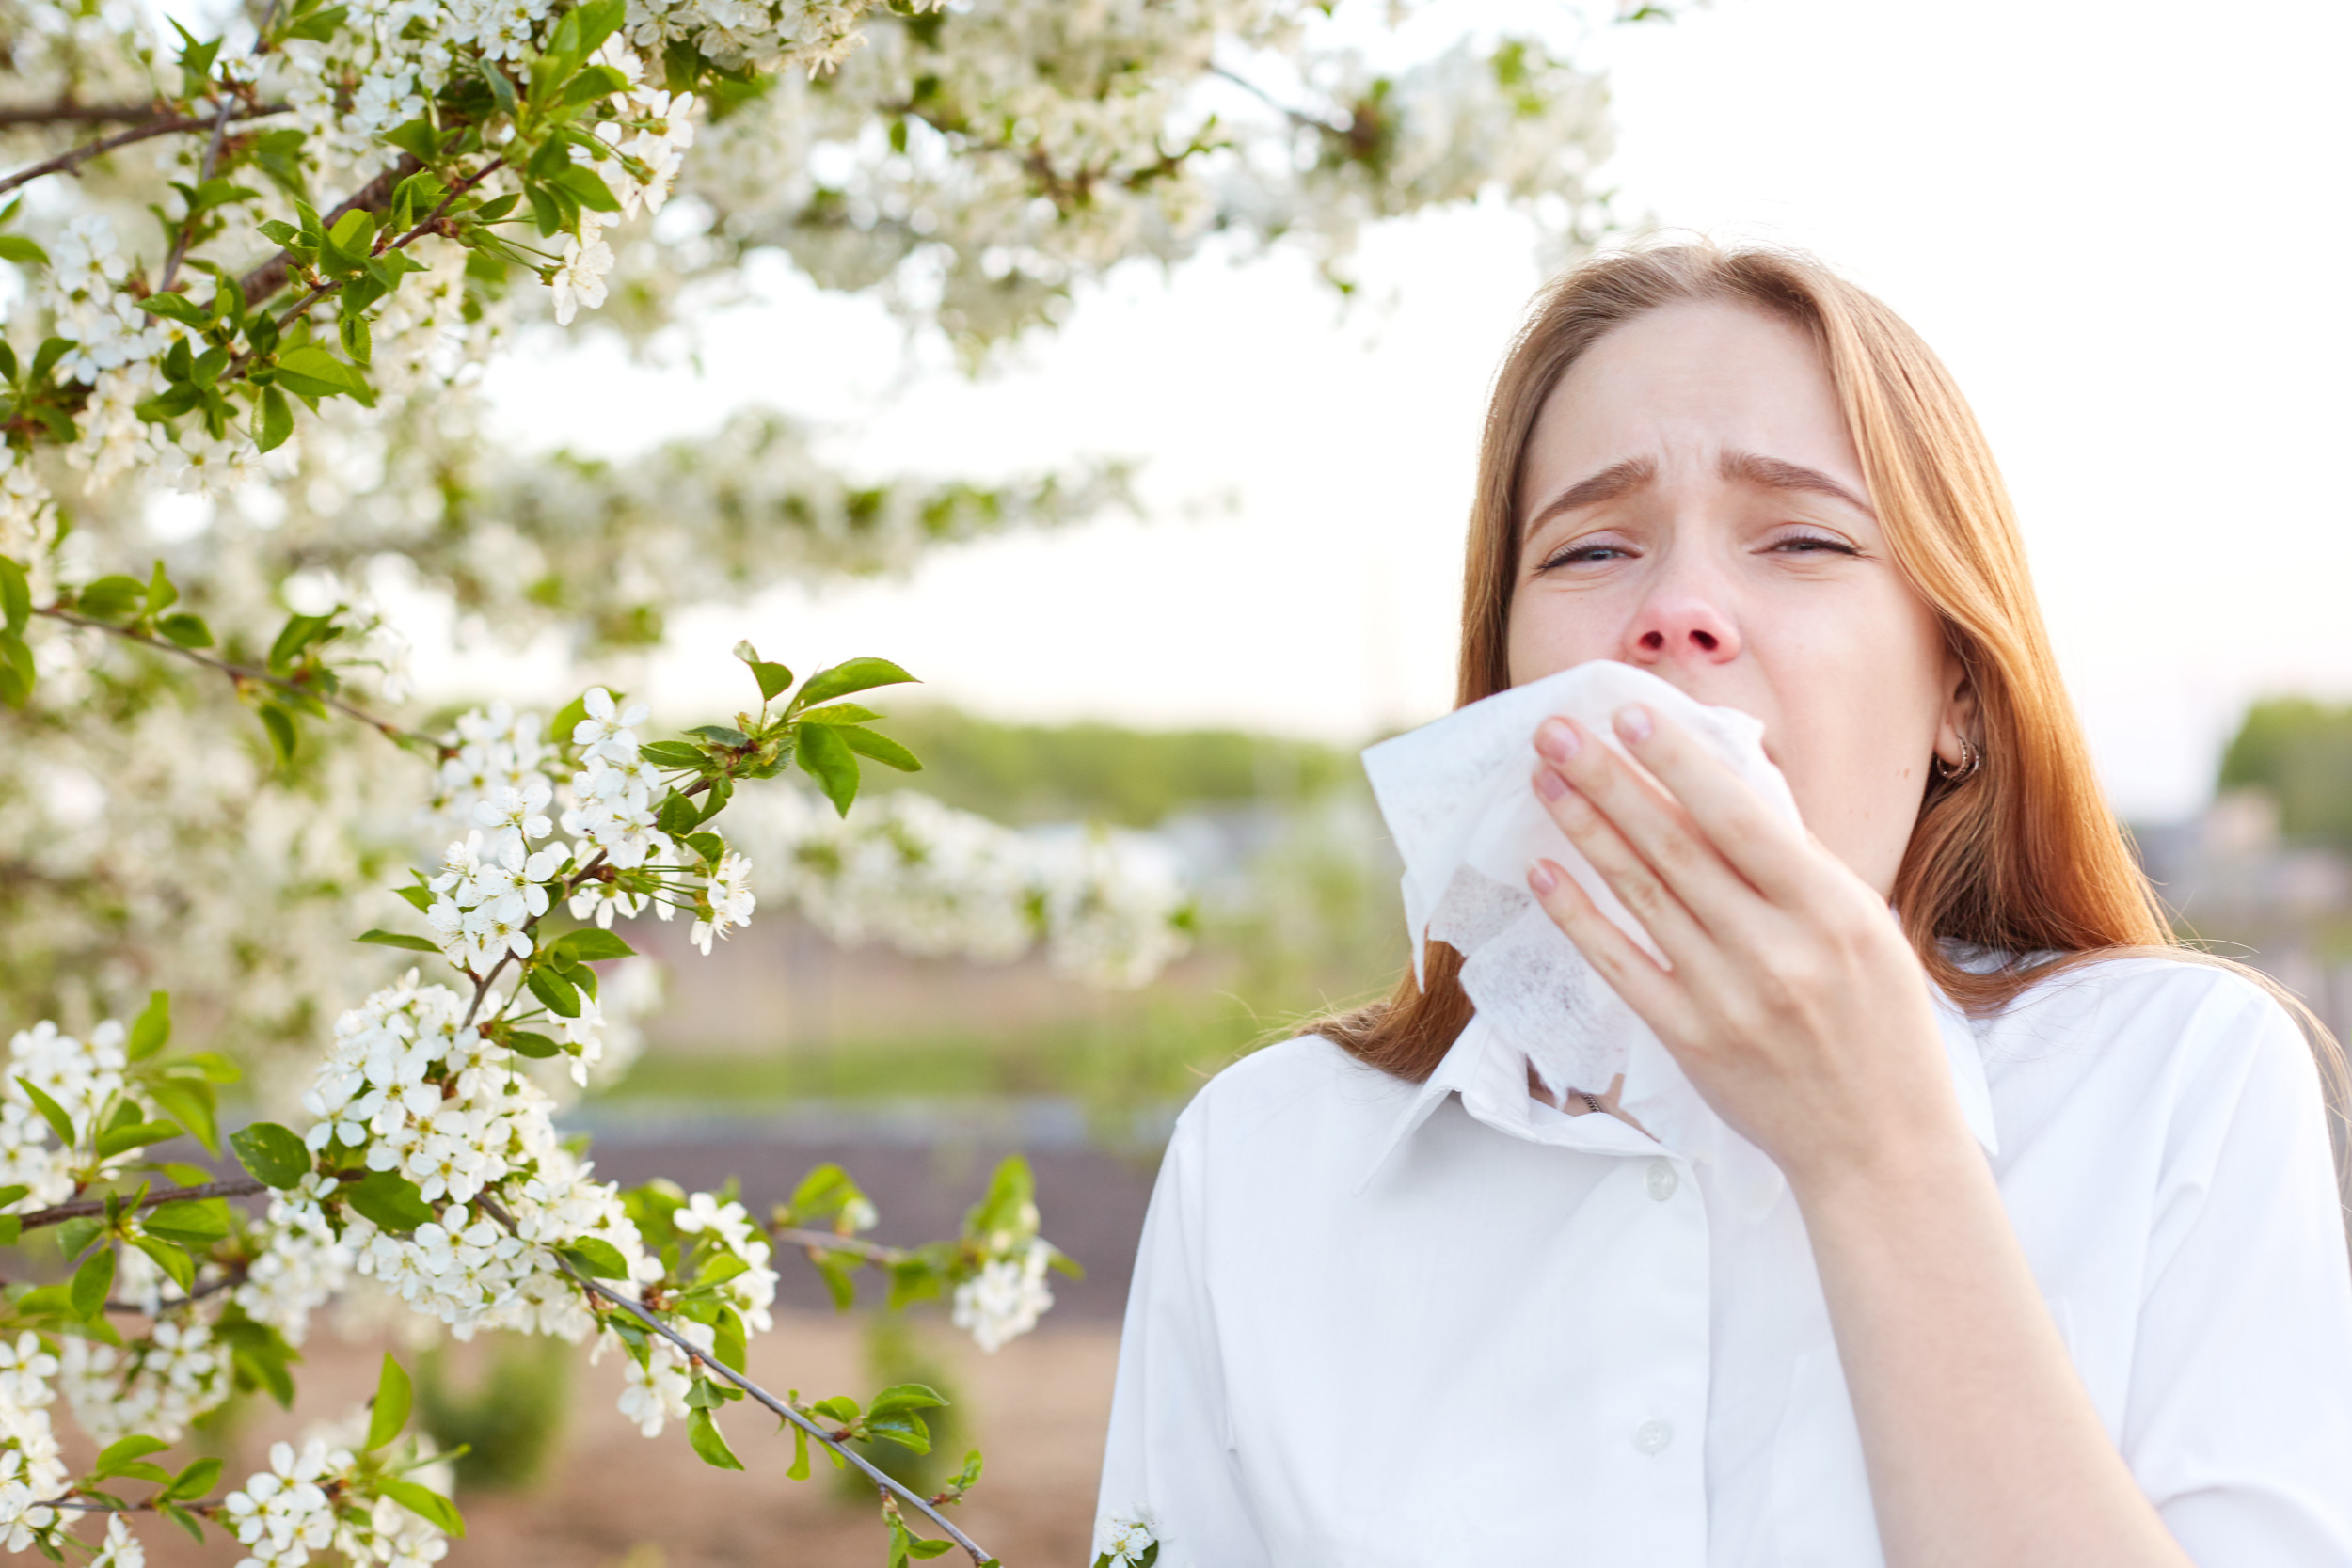 Why Your Breakfast Might Be Making Your Hay Fever Worse